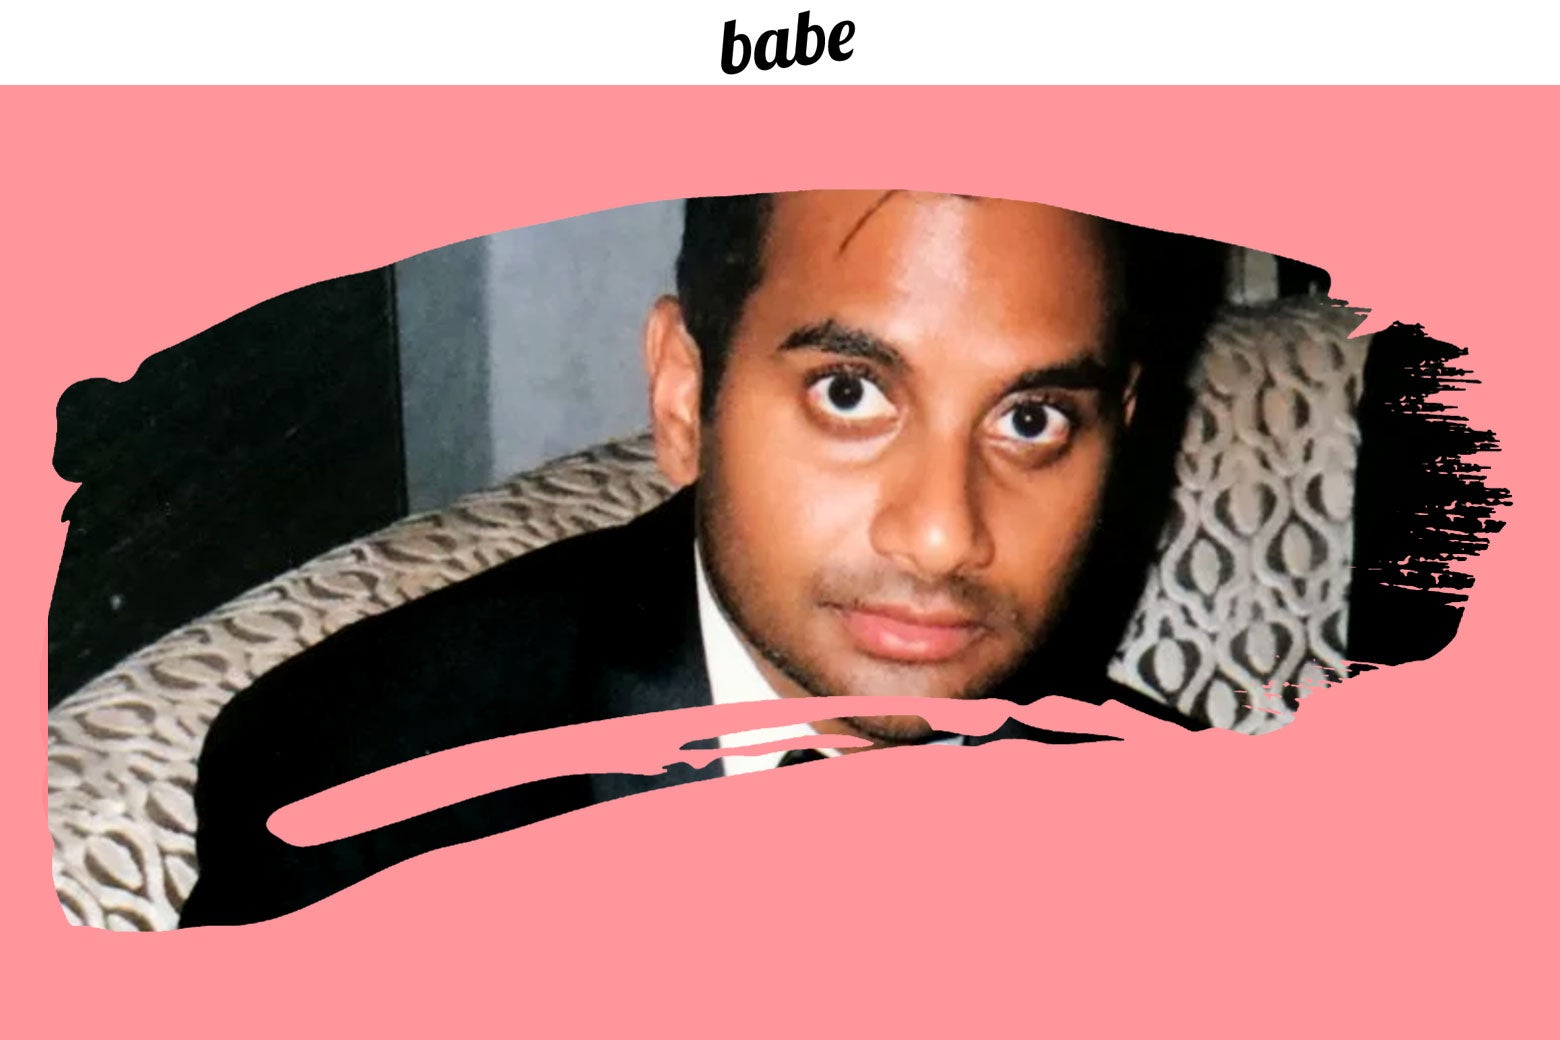 Aziz Ansari in a treated image from Babe.net